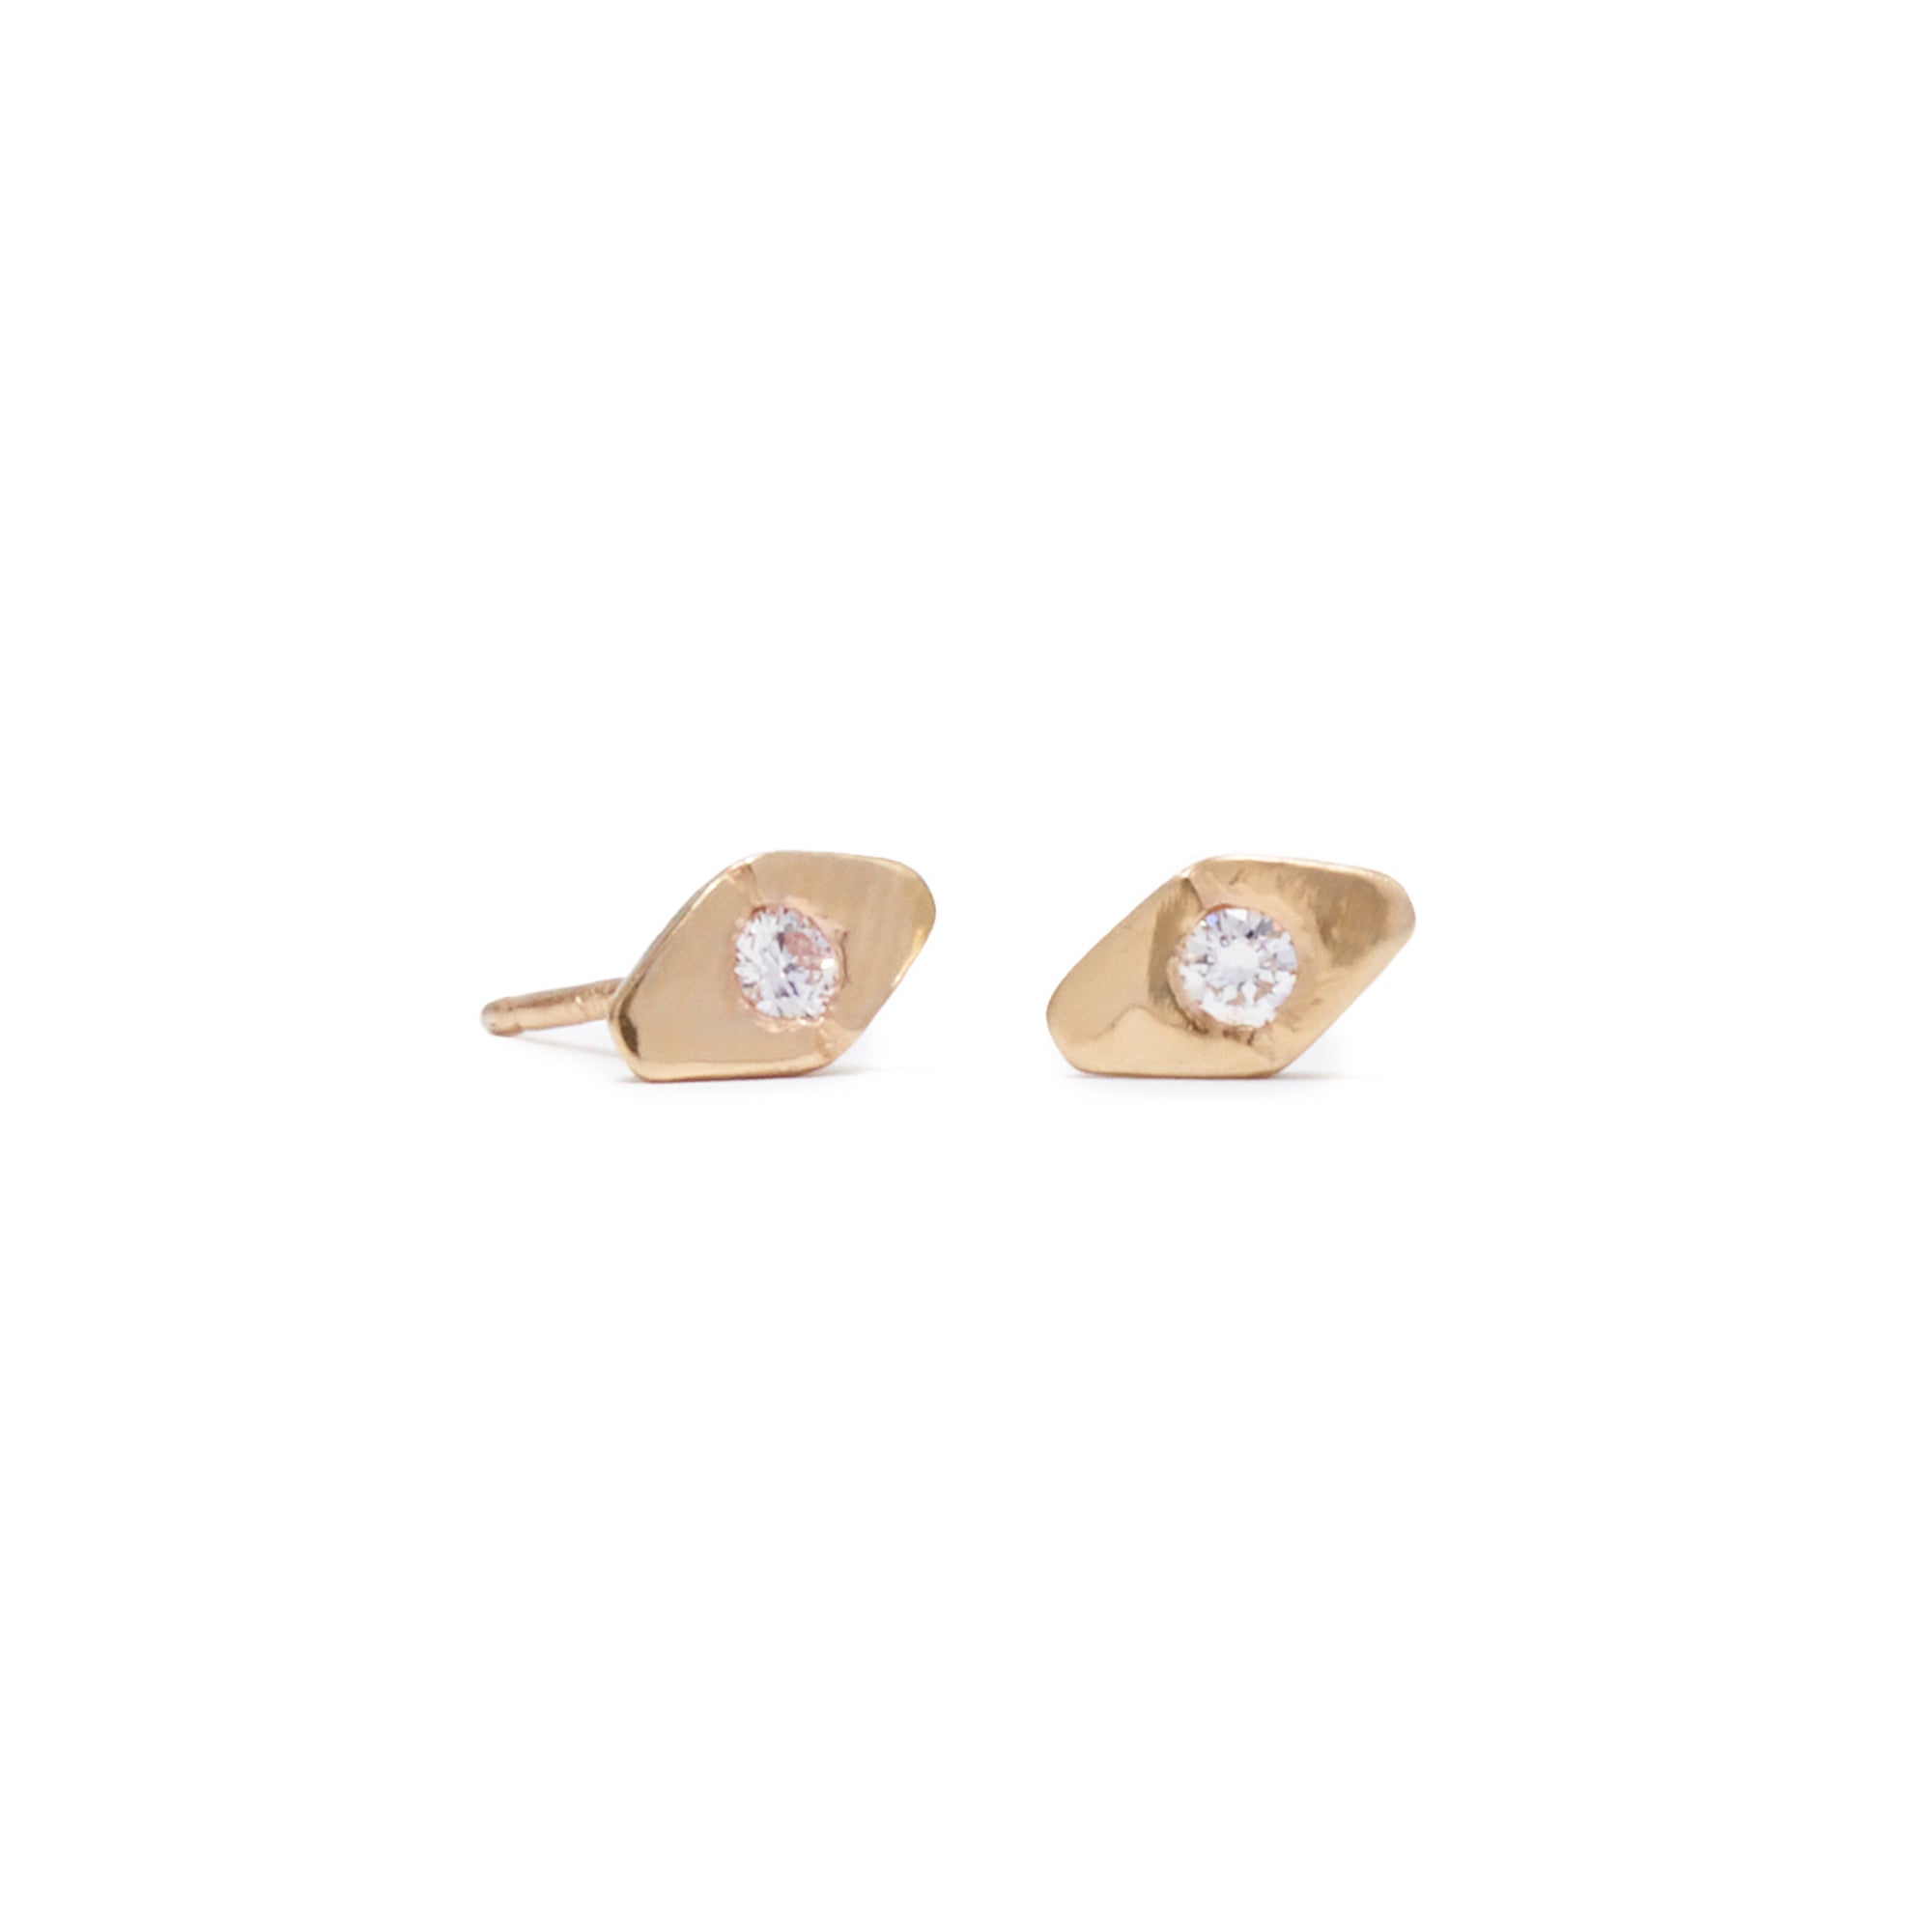 The chic Slope Studs feature a single 0.08 tcw diamond flush set in a lightly textured diamond-shaped stud.